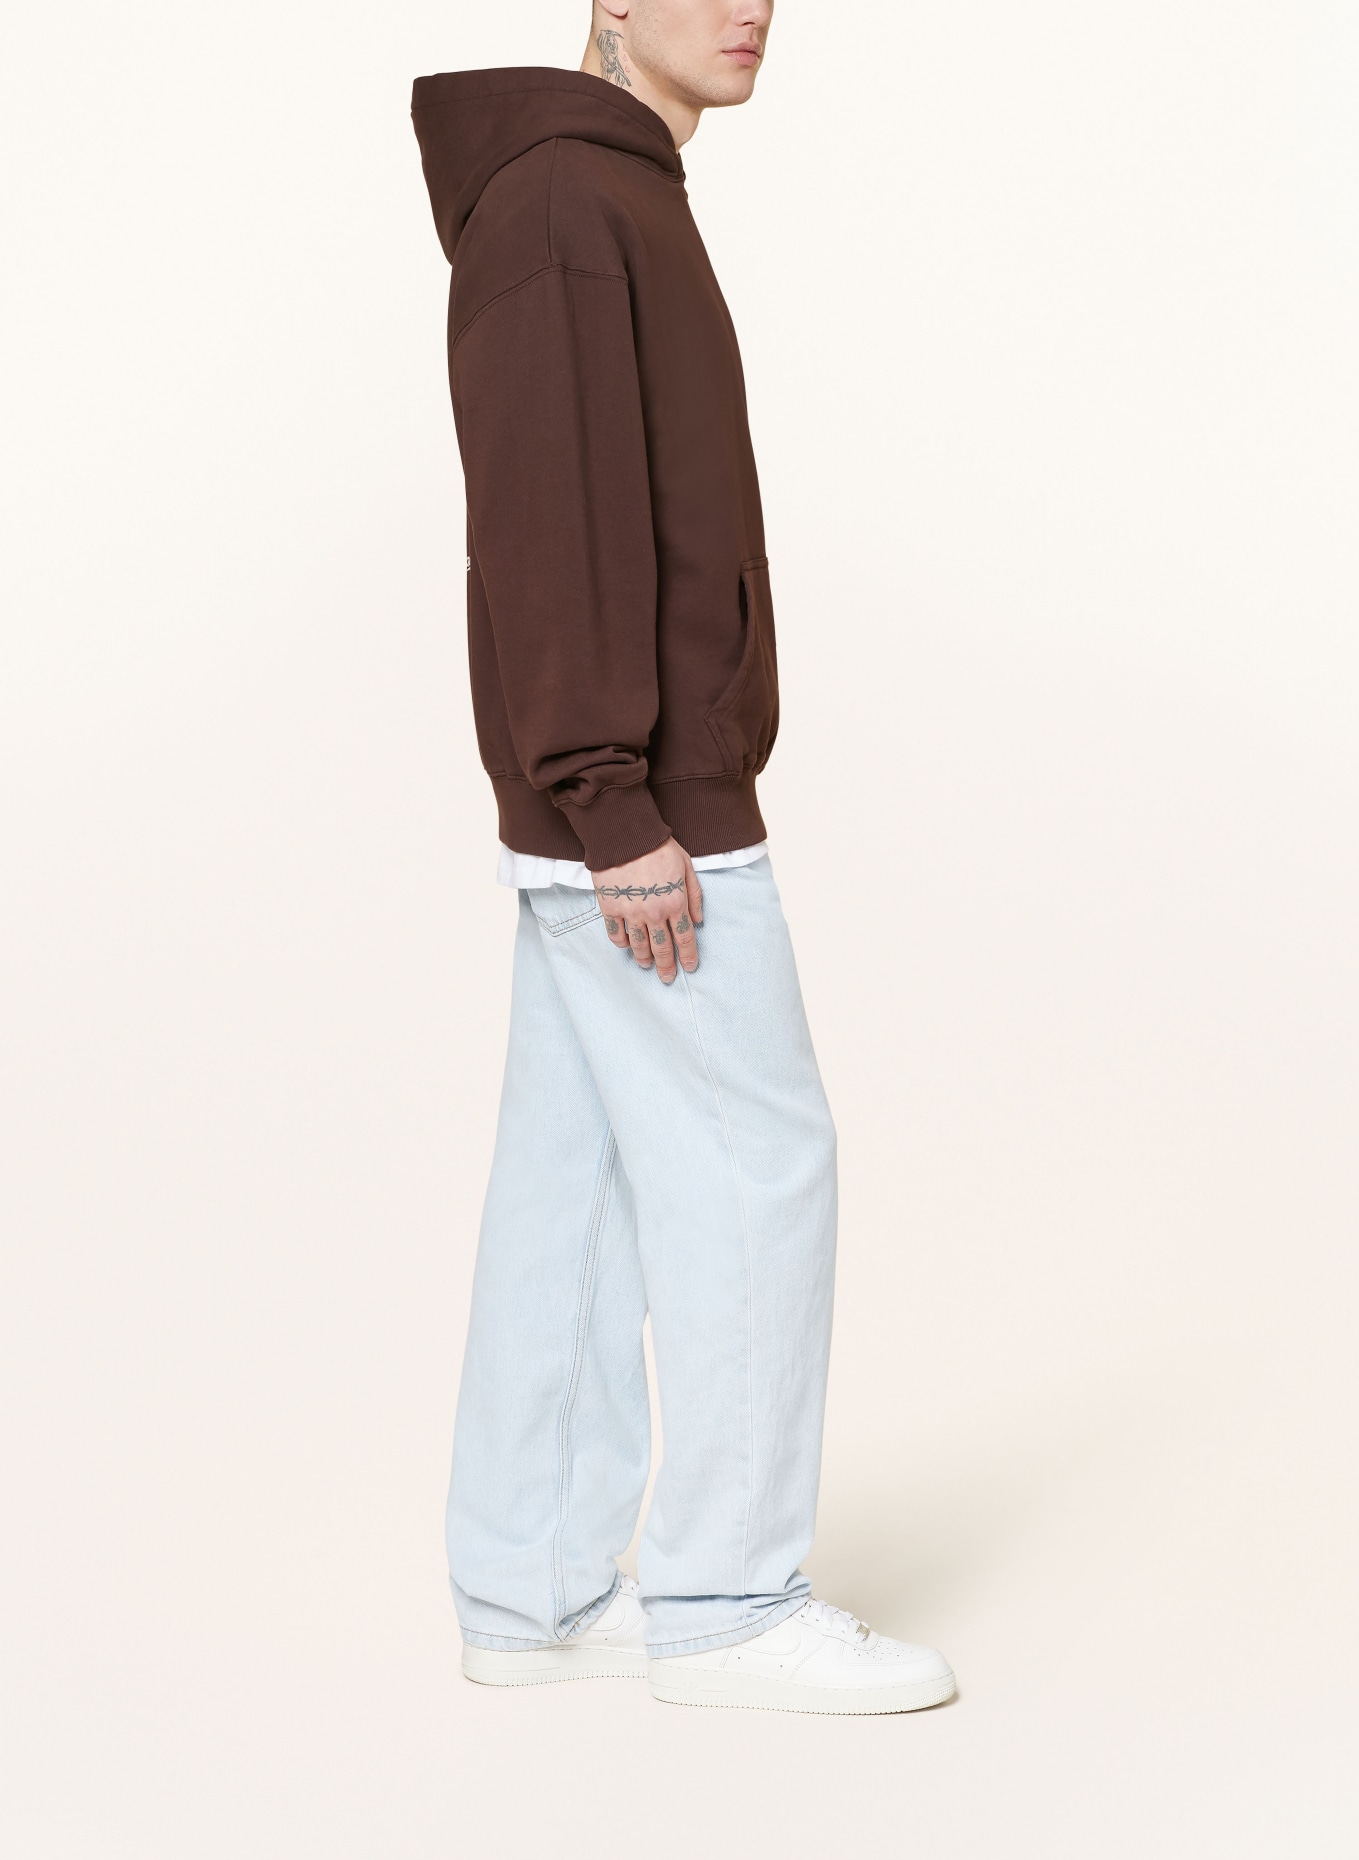 PEGADOR Oversized hoodie CRAIL, Color: BROWN/ LIGHT BROWN (Image 4)